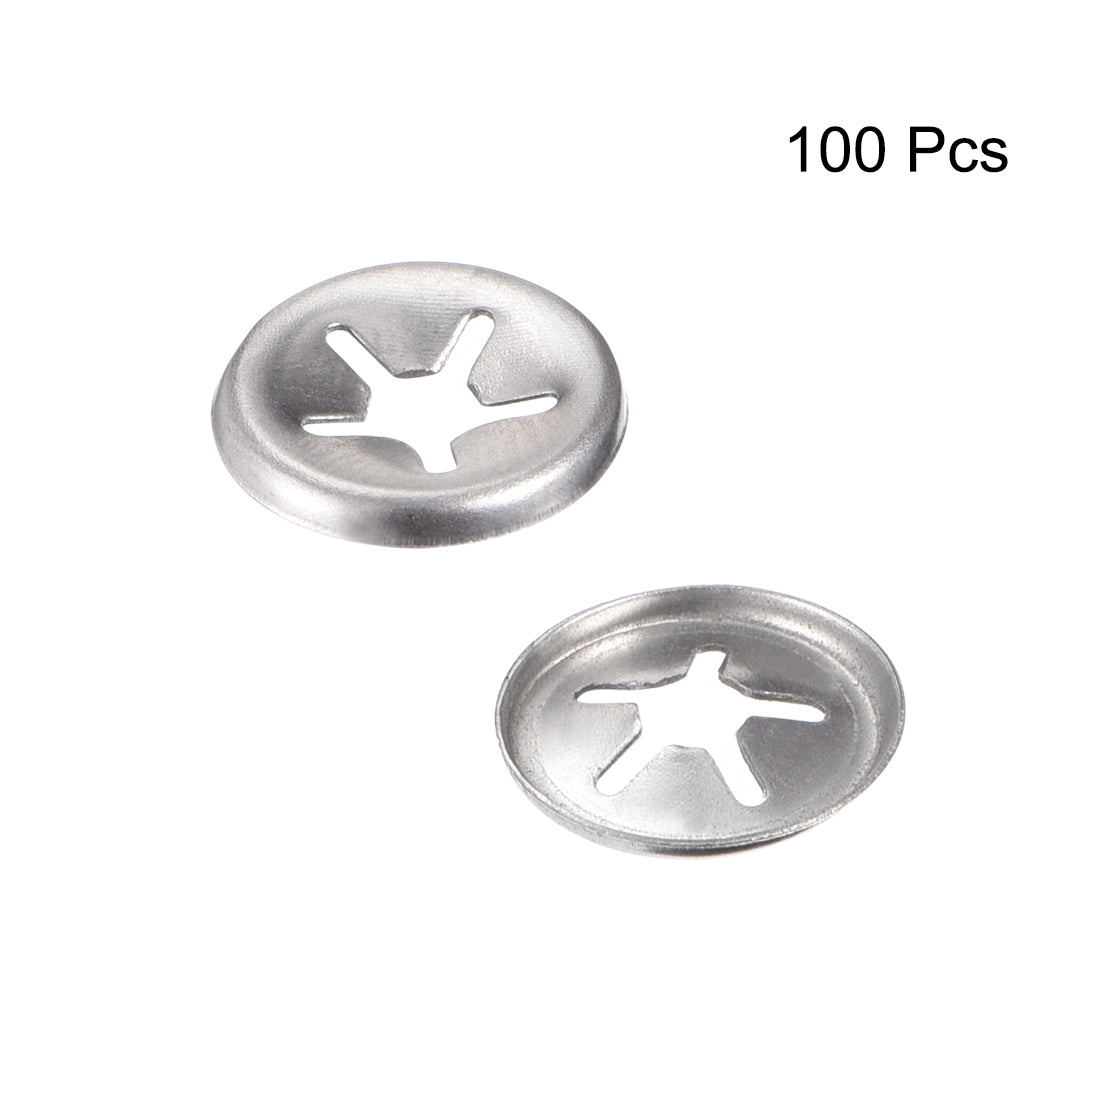 uxcell Uxcell M4 Internal Tooth Star Locking Washer 3.3mm I.D. 12mm O.D. Lock Washers Push On Locking Speed Clip, 304 Stainless Steel 100pcs